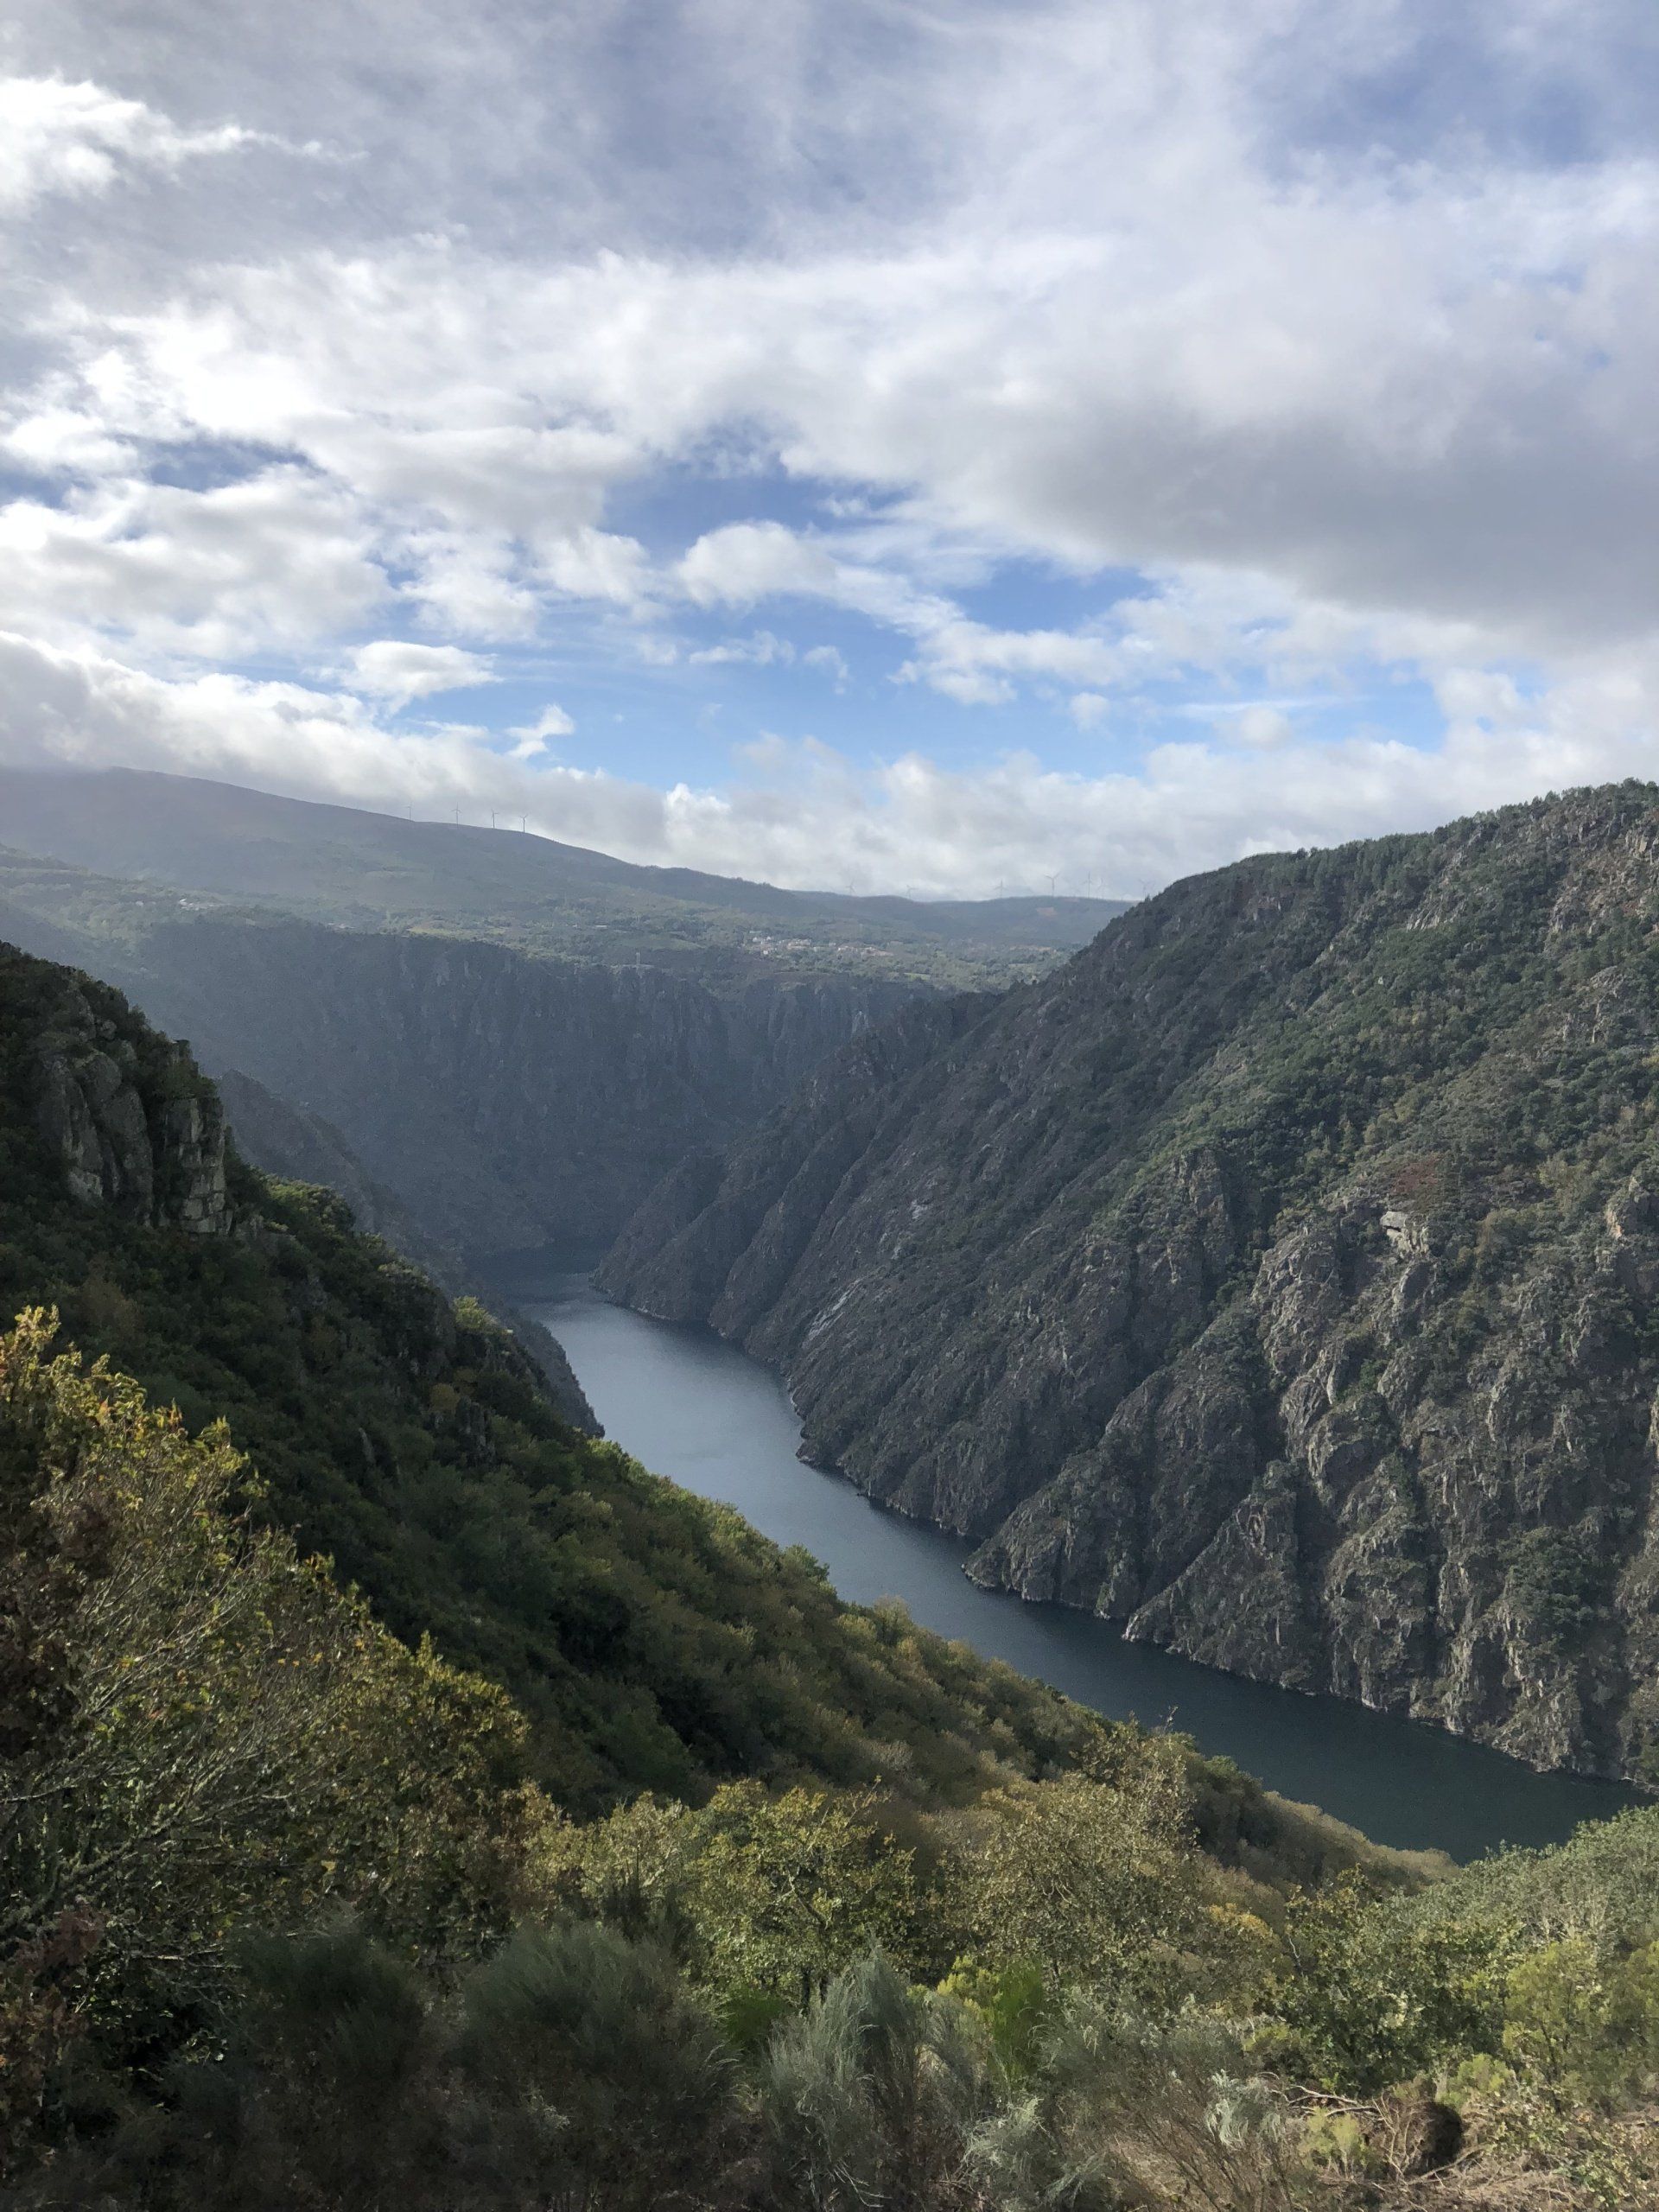 A panoraic view of the Sil River, Galicia, Spain